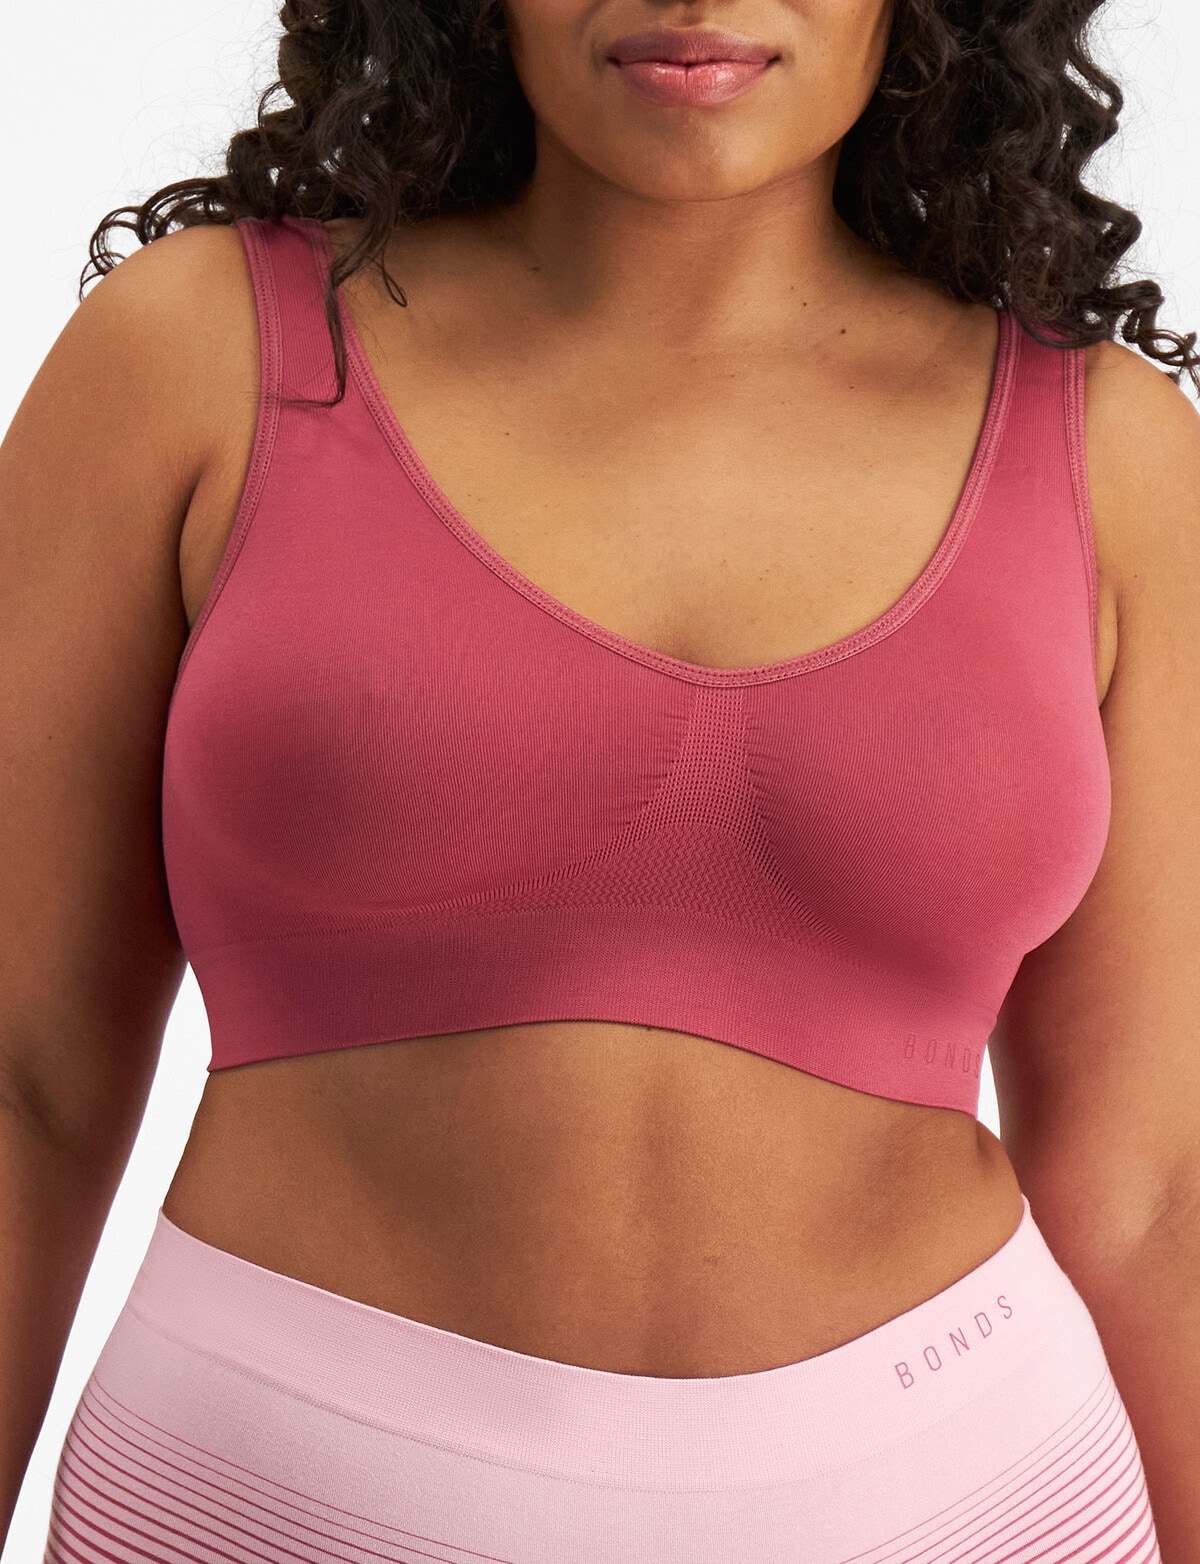 Bonds Women's Comfy Seamless Full Brief - Pink & Red - Size 12